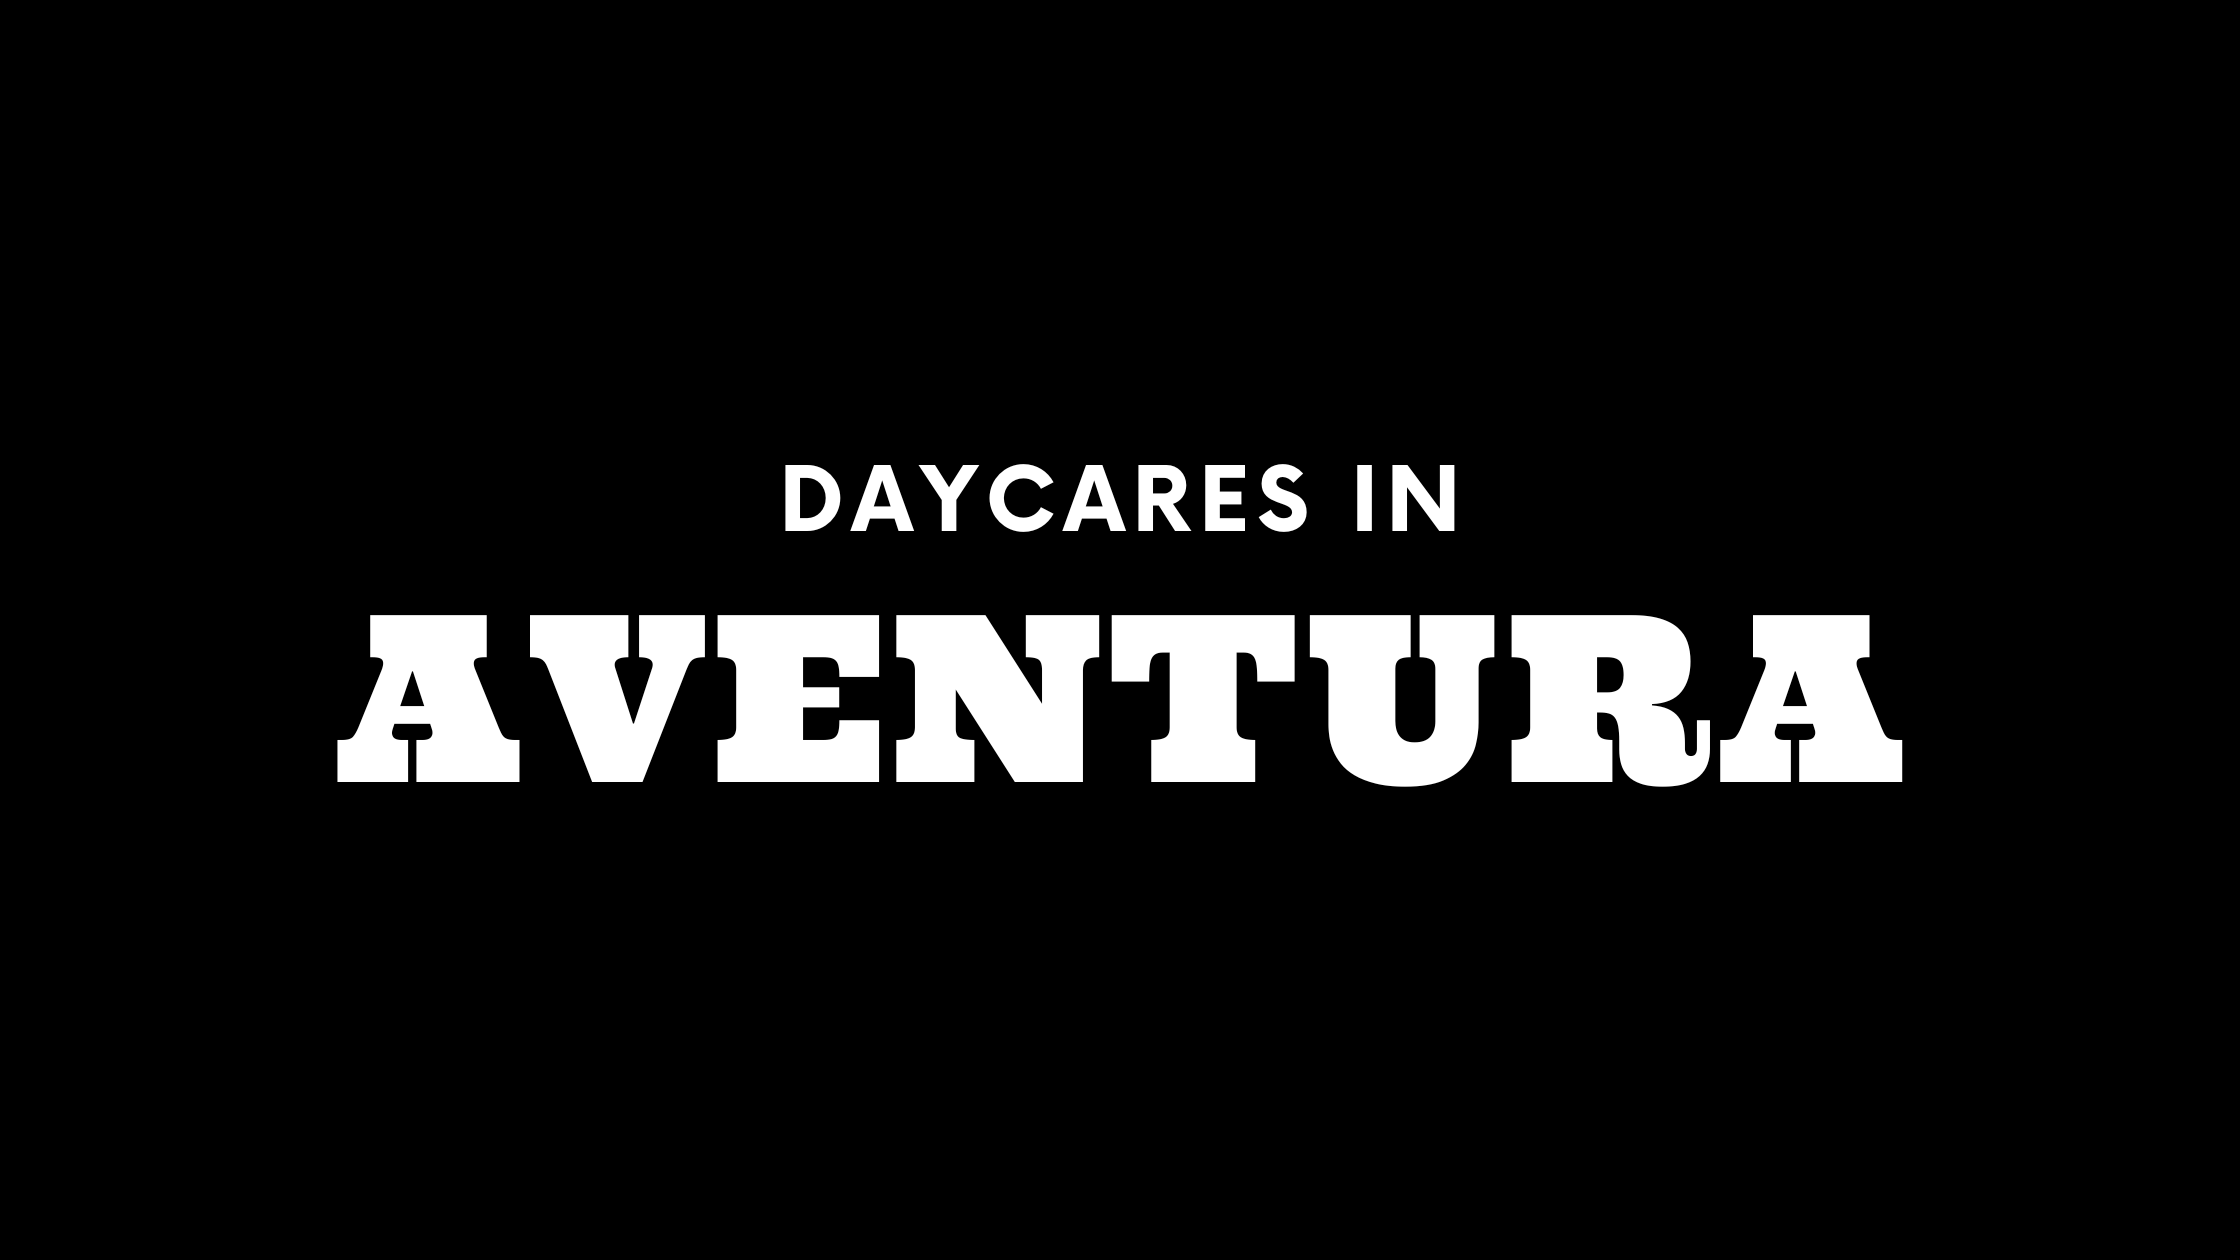 Daycares in Aventura